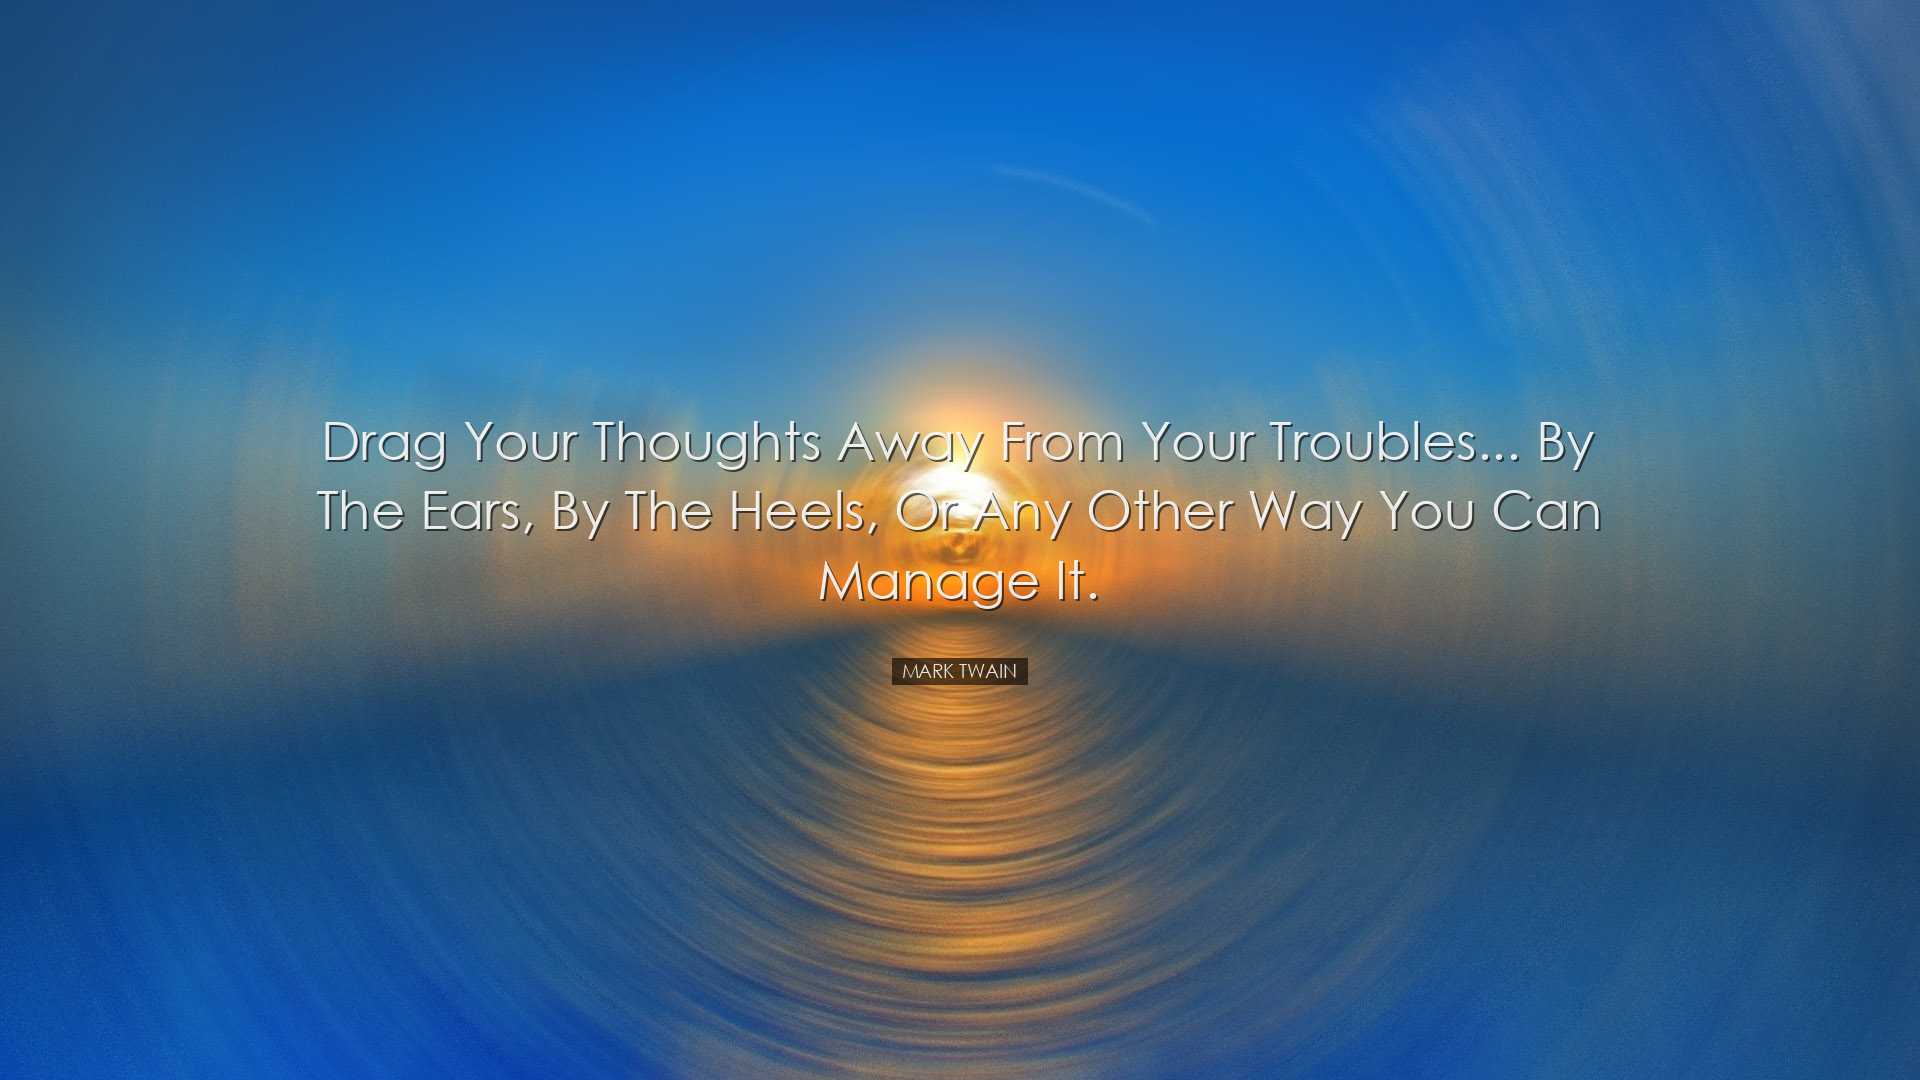 Drag your thoughts away from your troubles... by the ears, by the